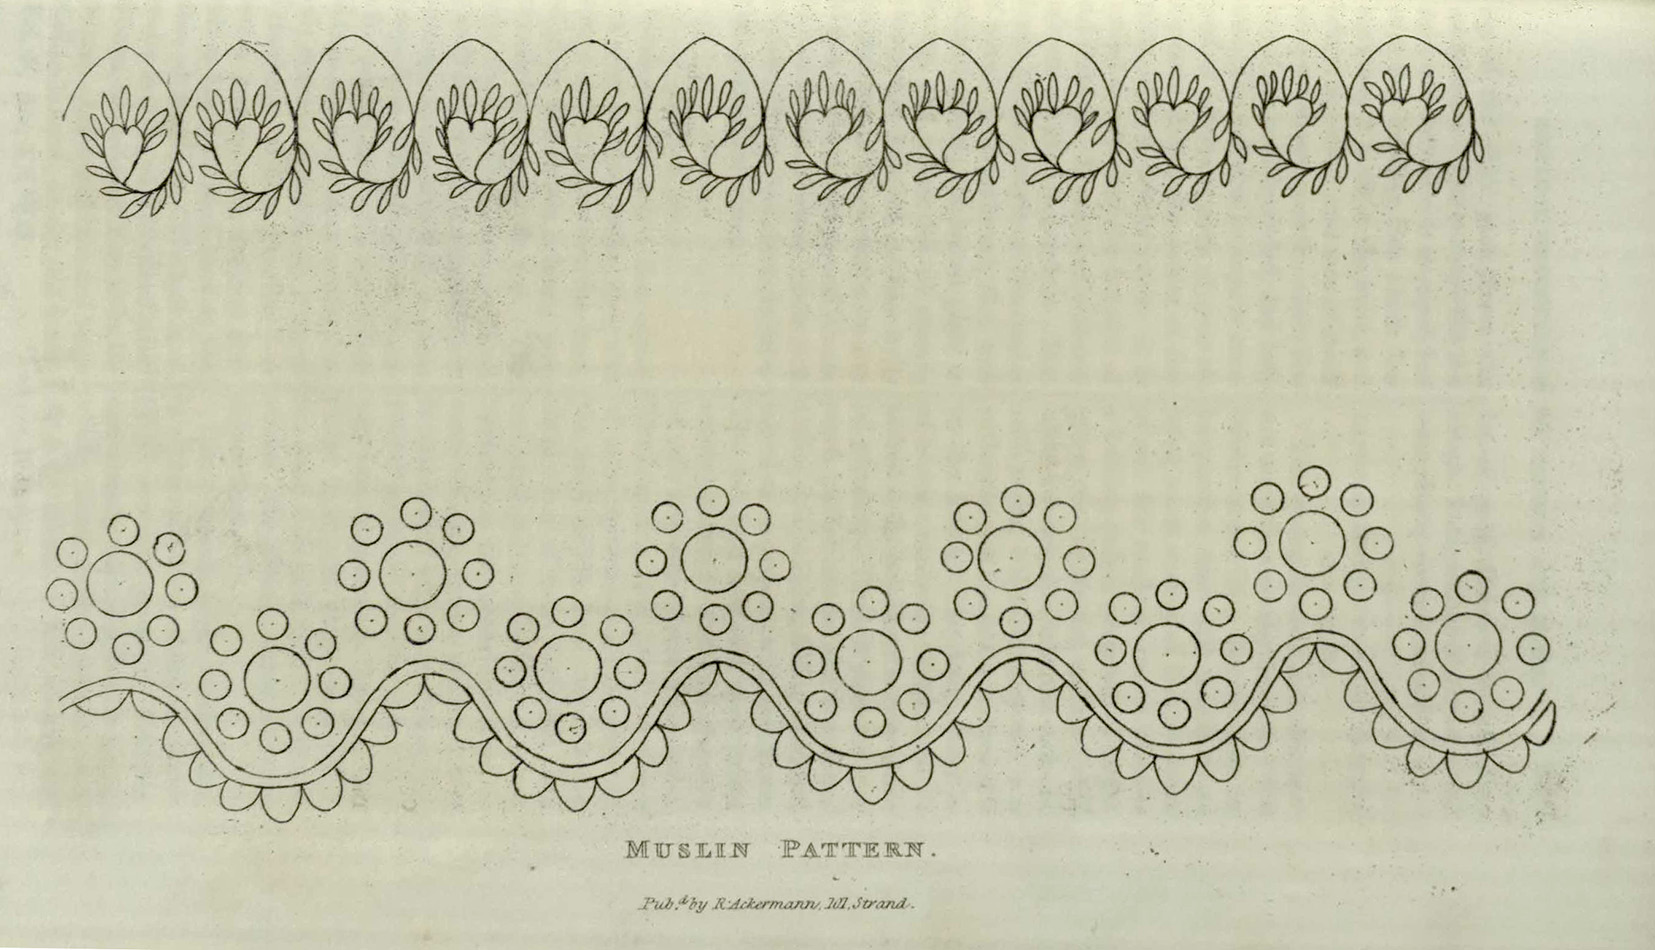 Muslin Pattern" from the April 1825 issue of Ackermann's Repository.